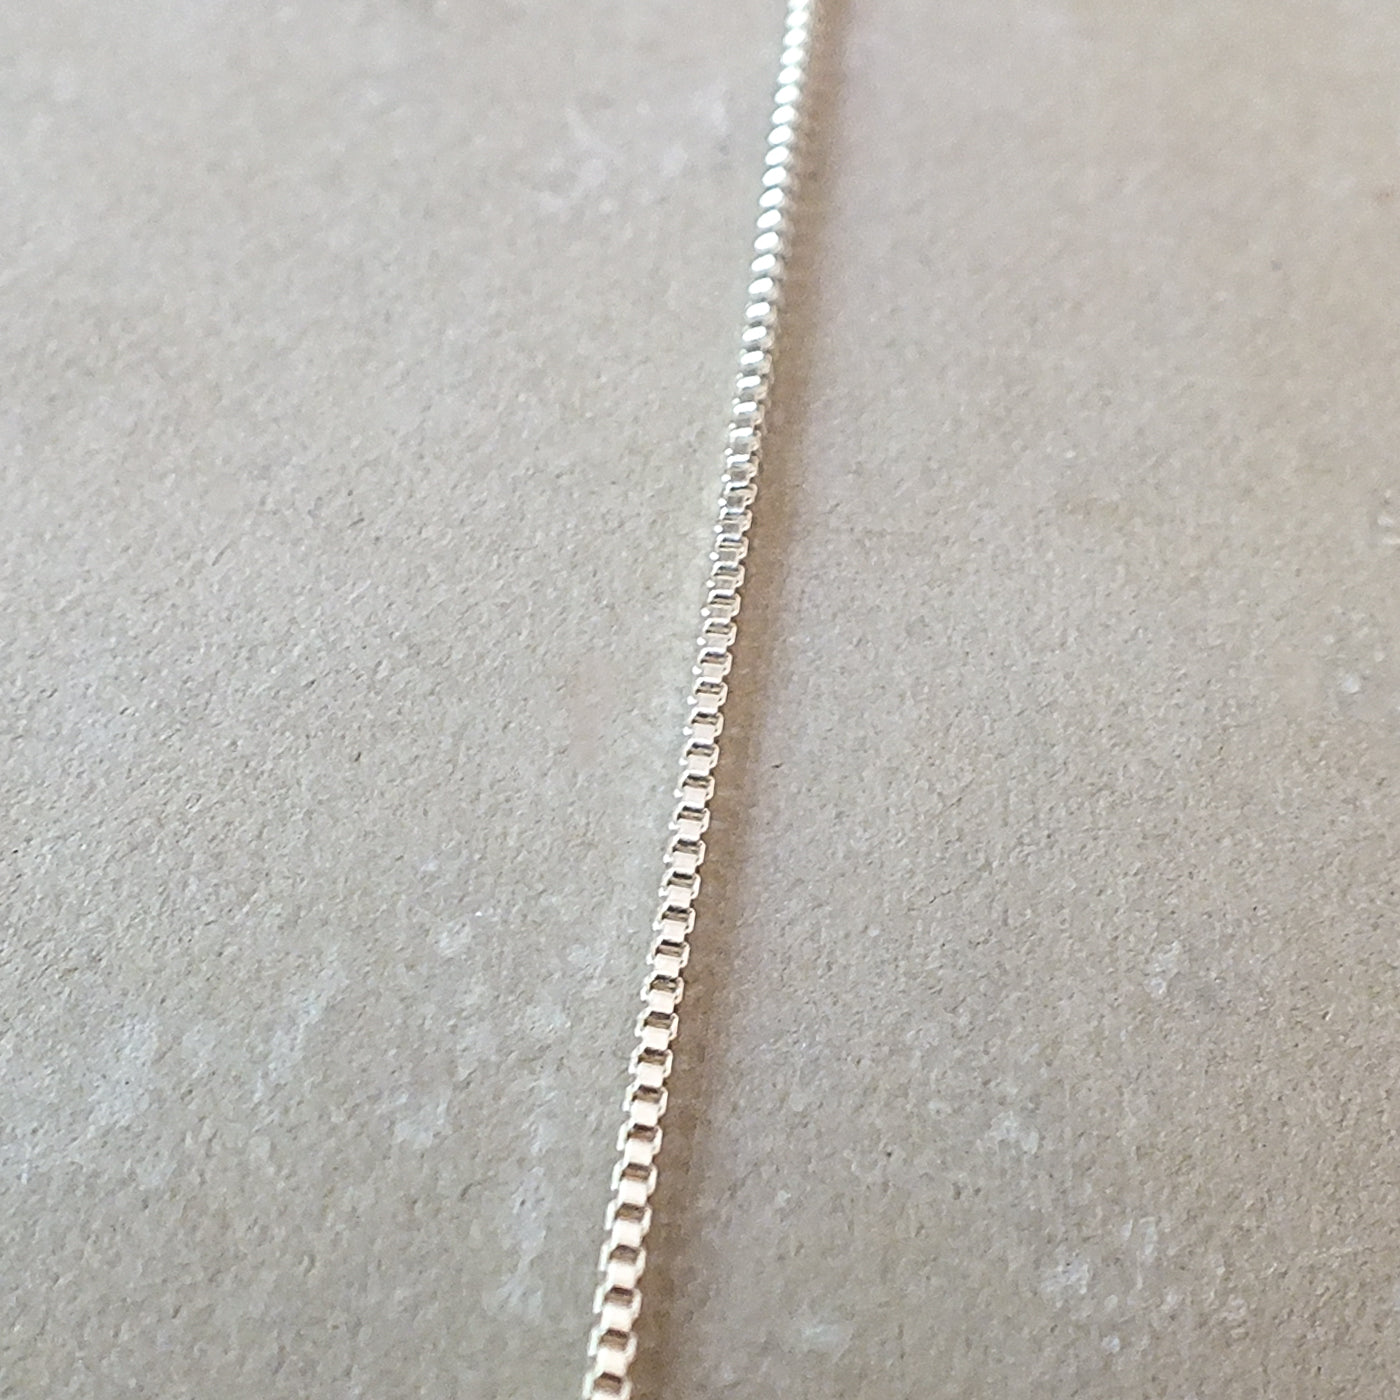 A close-up of a delicate Becoming Jewelry sterling silver box chain necklace lying on a textured surface.